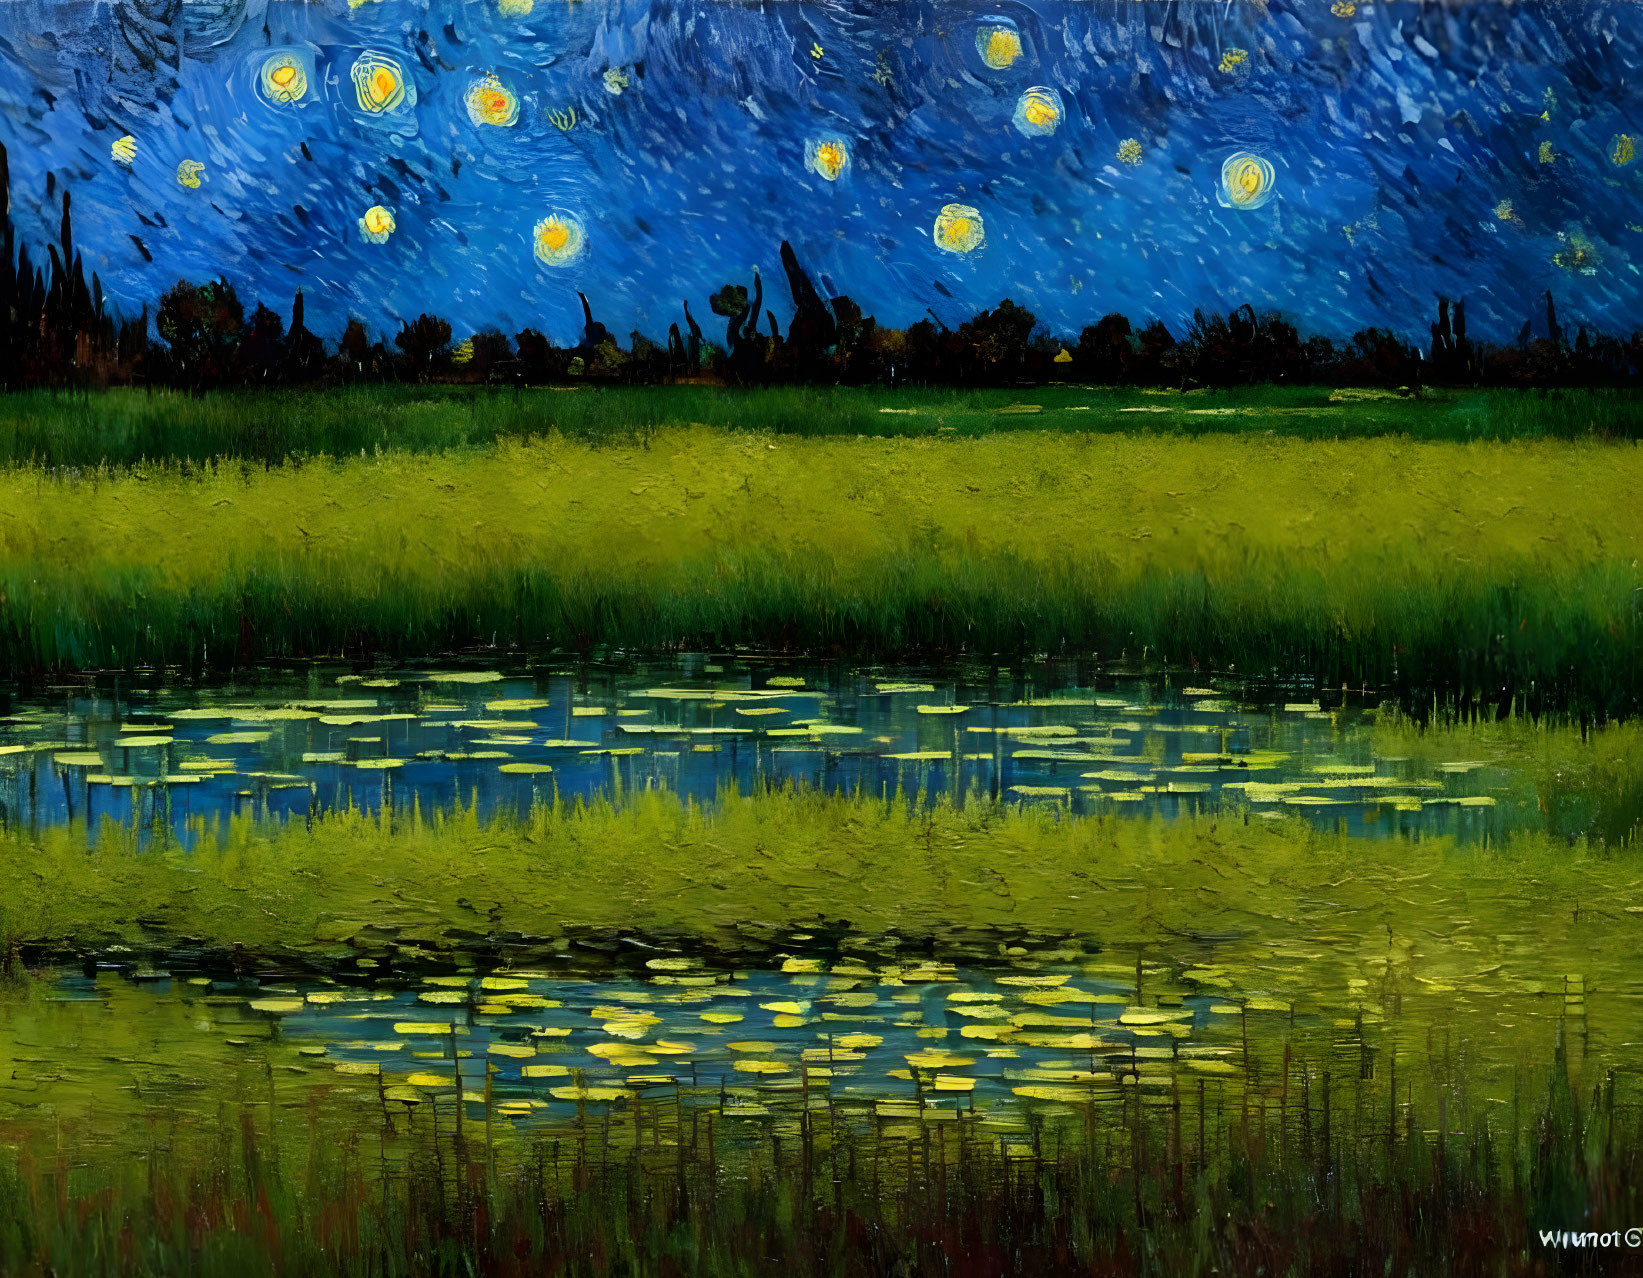 Starry Night Landscape with Moonlit River and Vibrant Brush Strokes